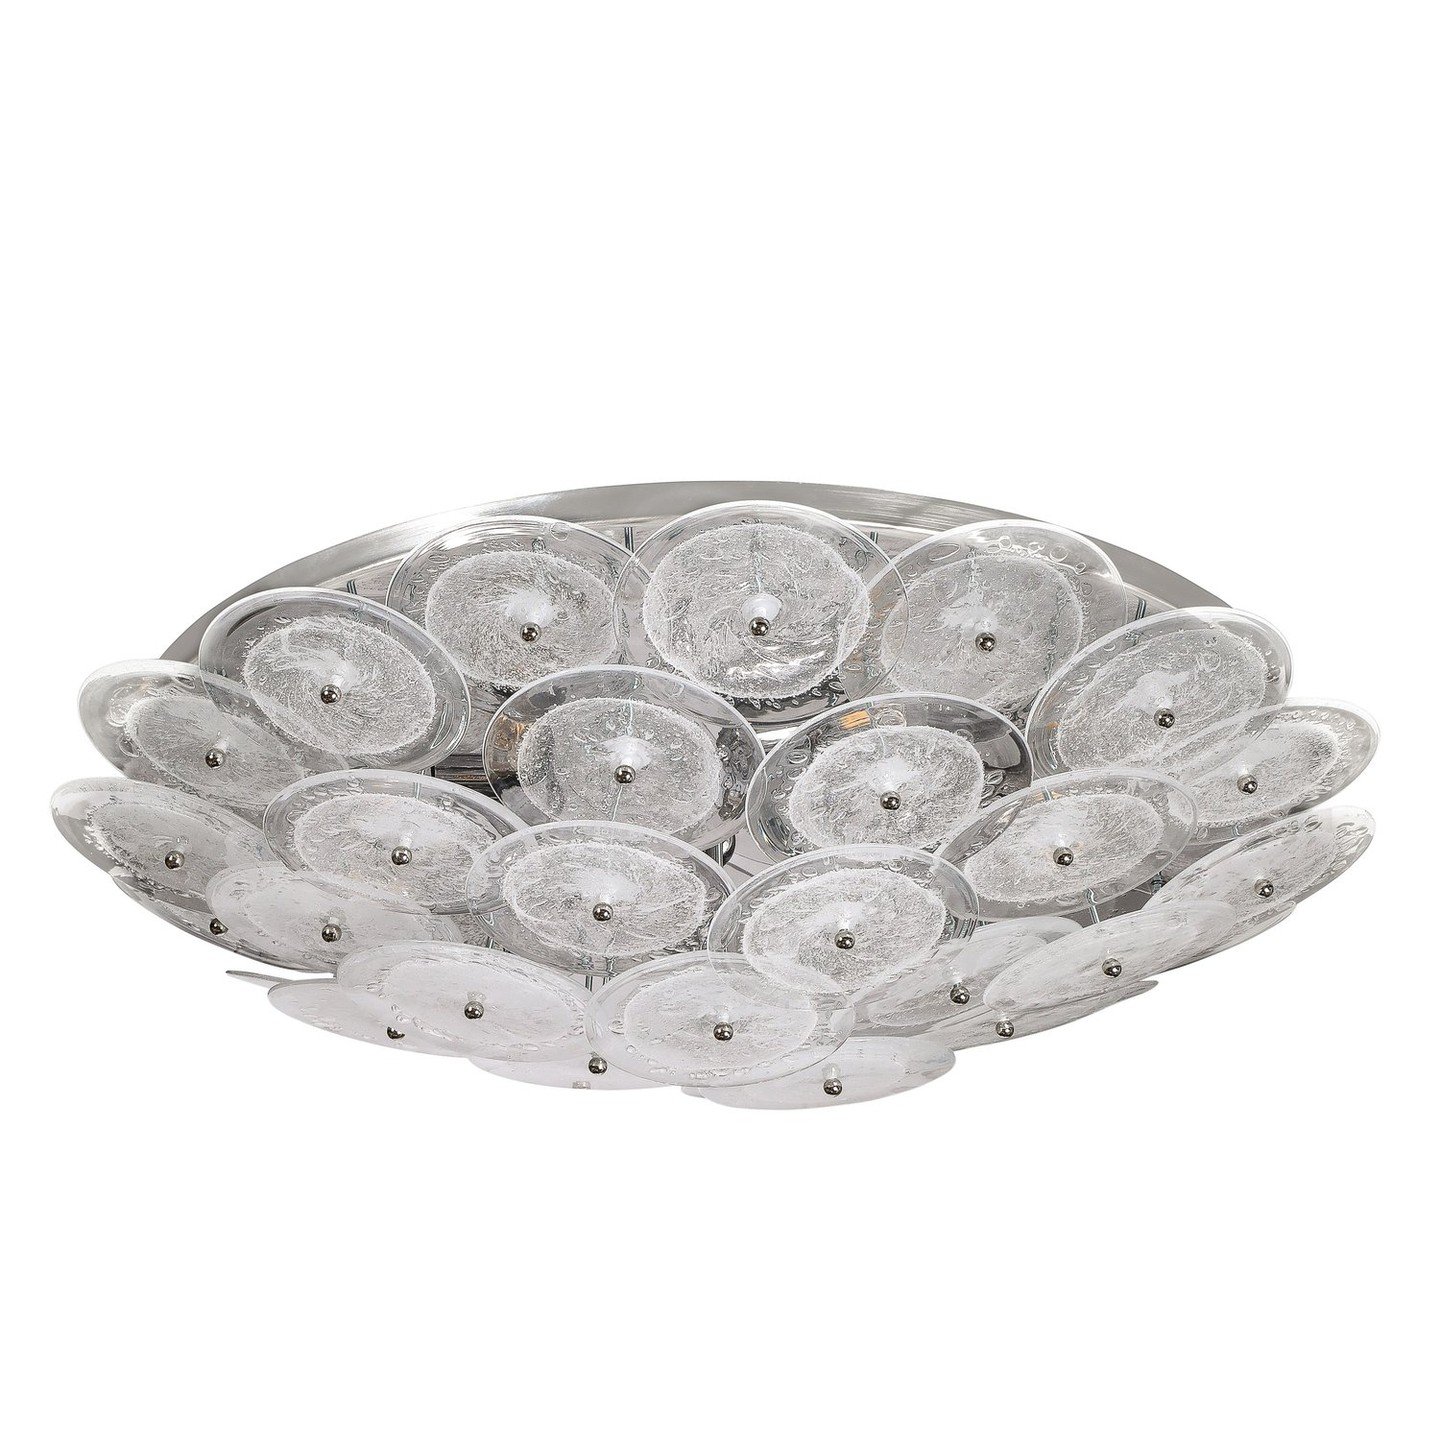 Flush Mount Murano Disc Chandelier in Clear Glass and Chrome Frame

Flush mount chandelier with handblown Murano clear glass discs in the Manner of Vistosi. This flush mount chandelier consists of an array of numerous, individually attached handblown